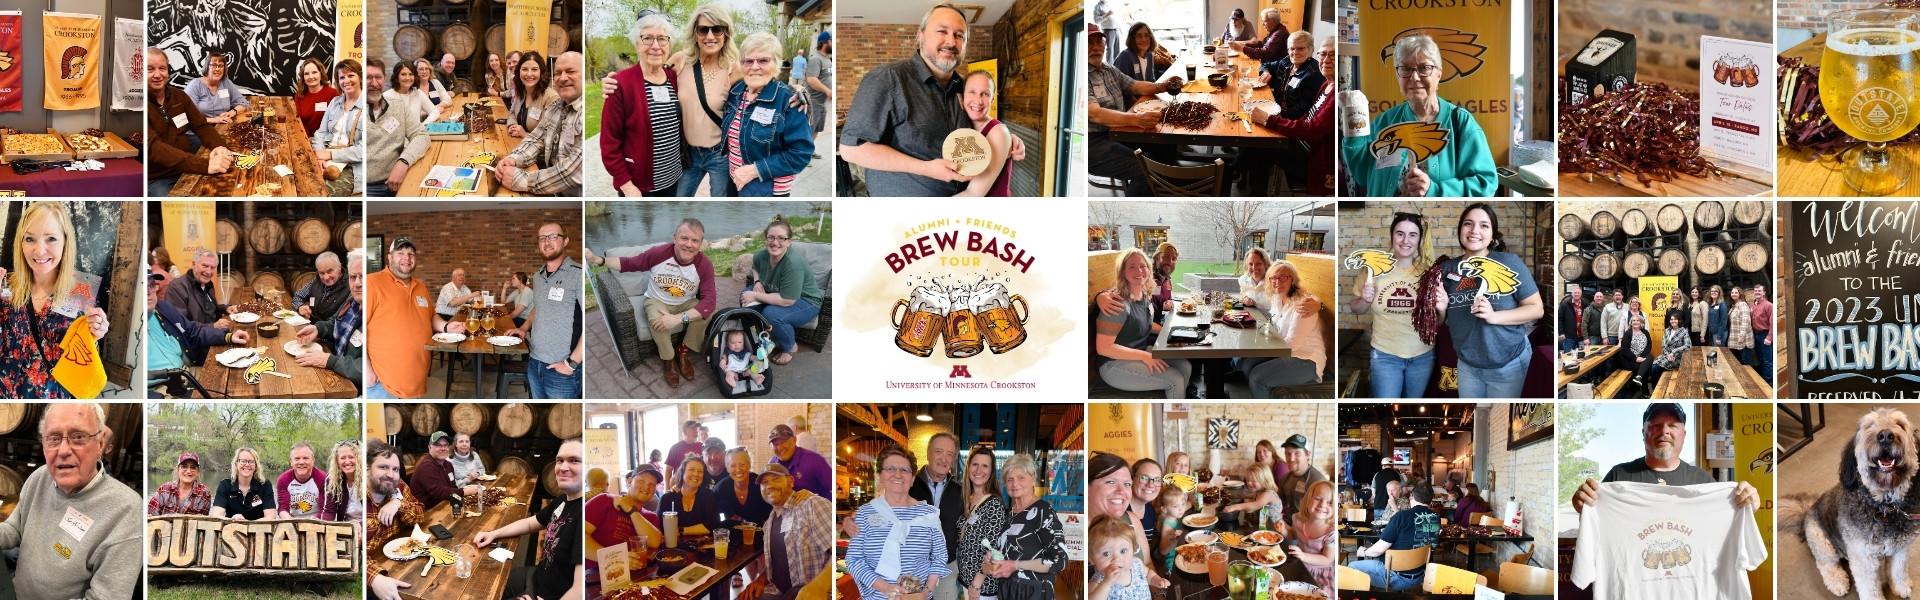 Alumni and Friends Brew Bash 2023 collage of photos